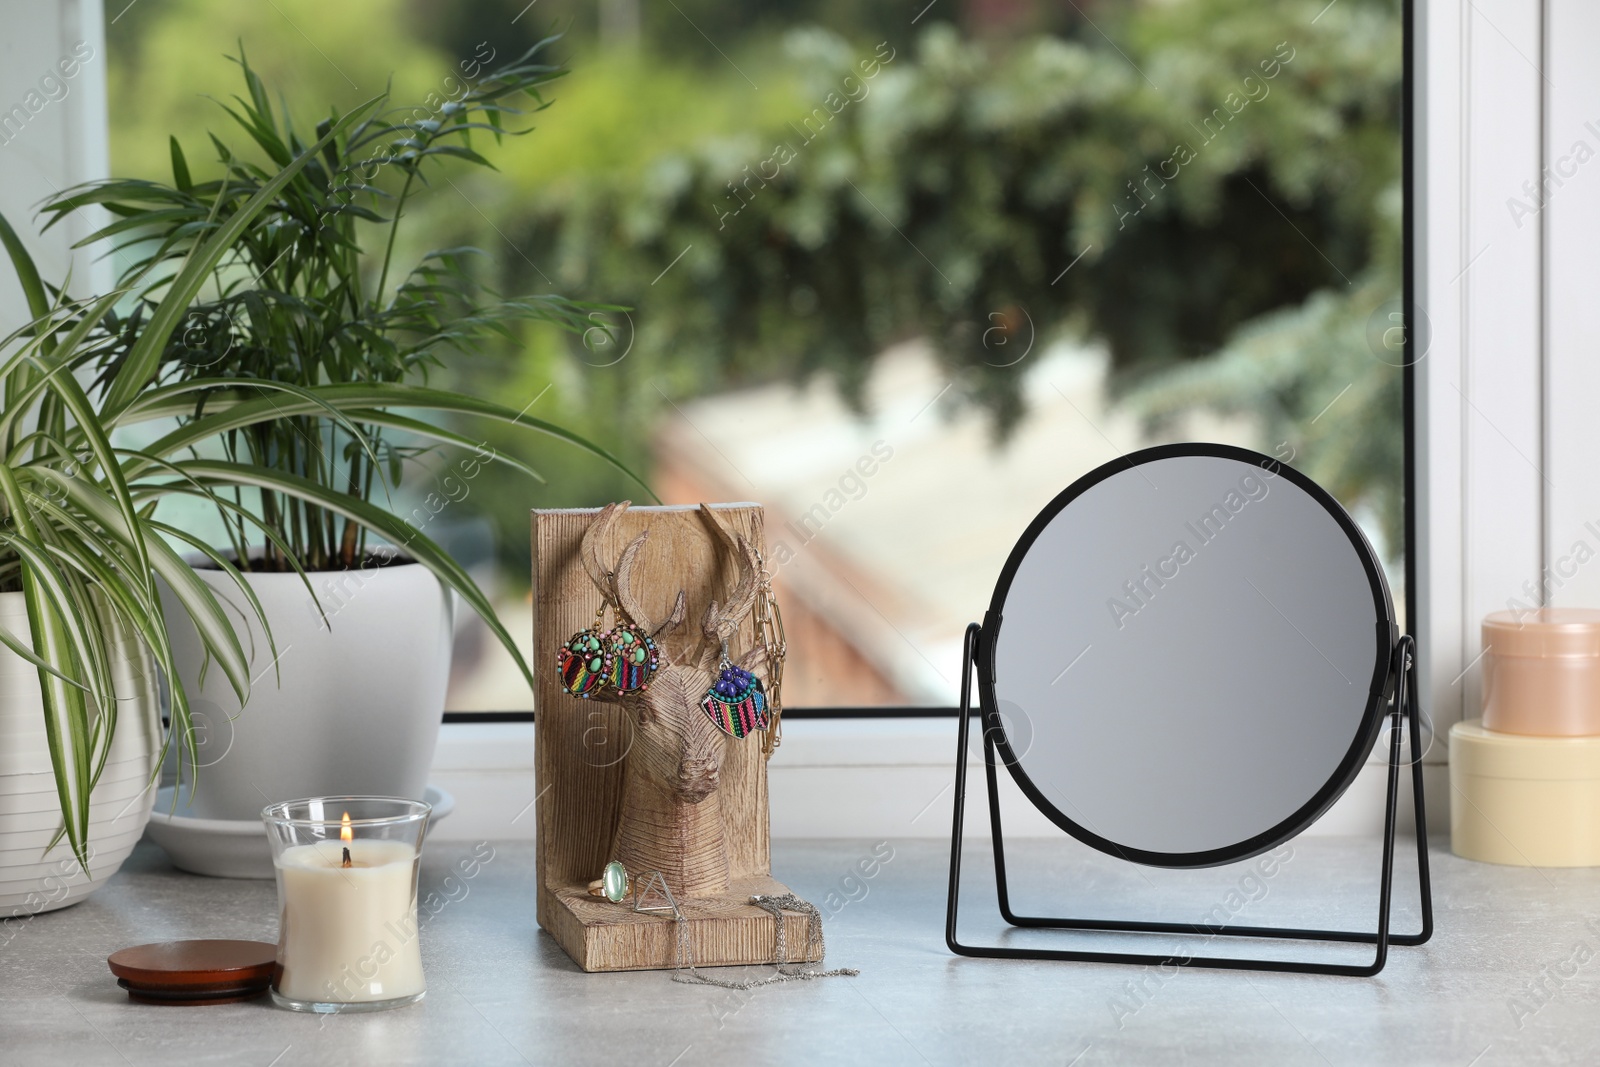 Photo of Mirror, jewelry, candles and houseplants on light grey stone window sill